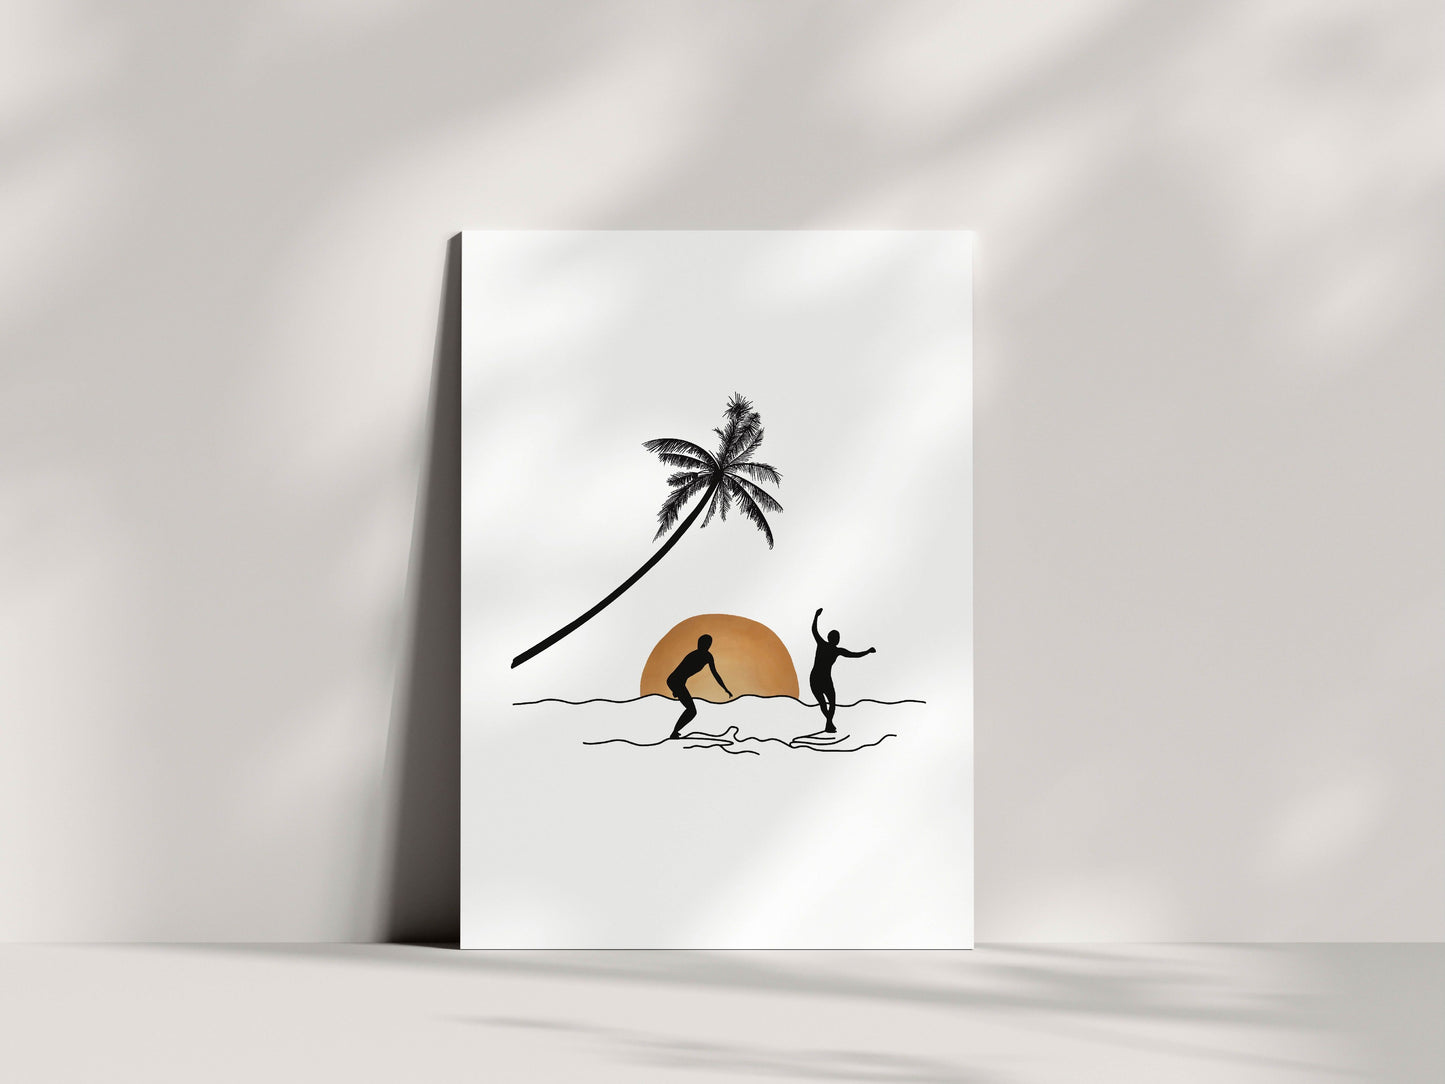 Surf And Camp - Art prints - A5 - Set of 6